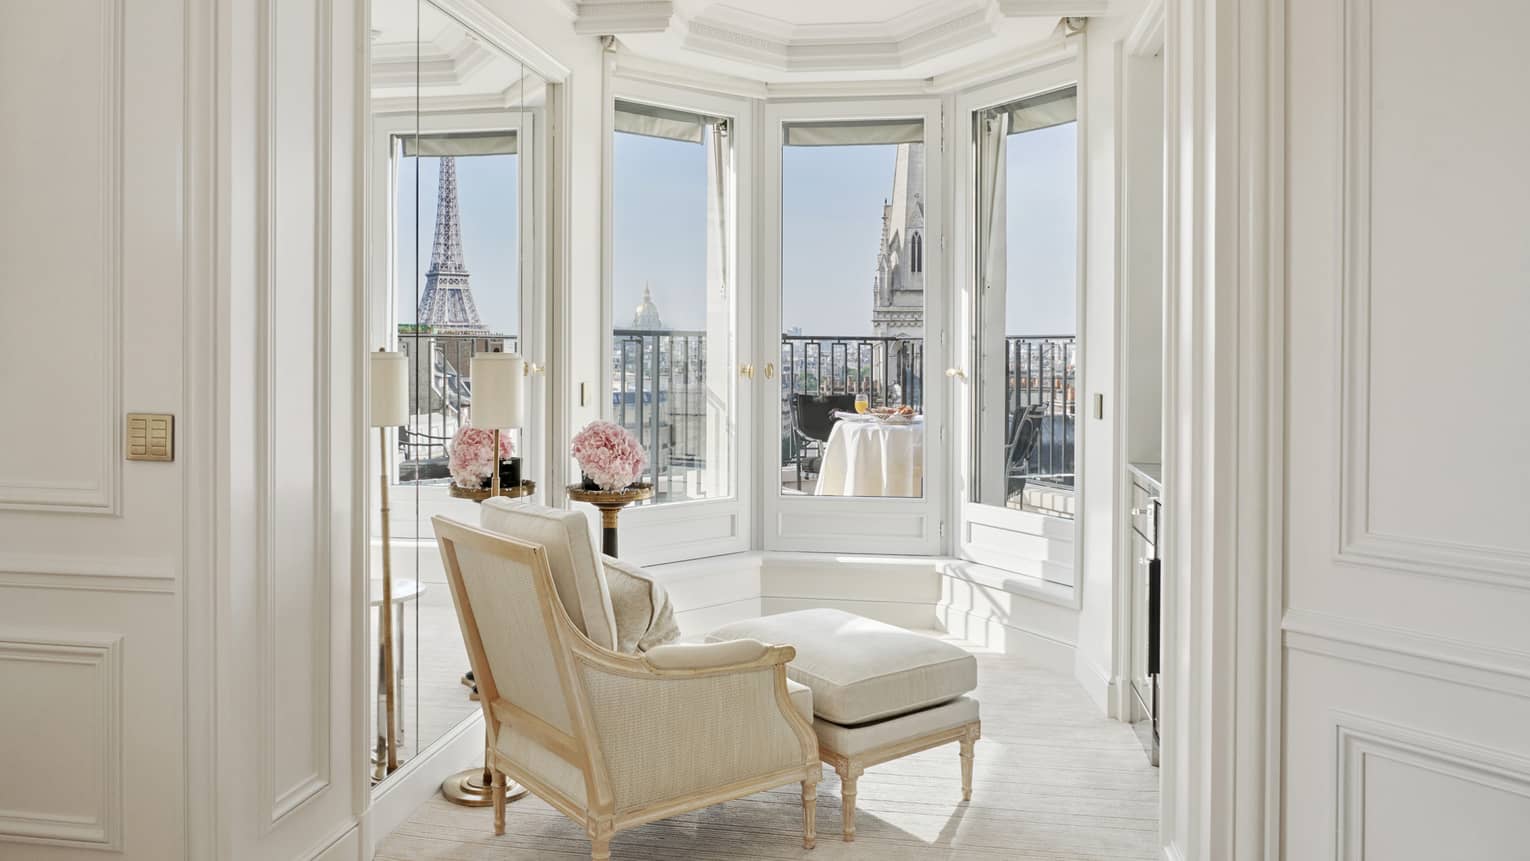 A white room has windows and a balcony with a direct view of the Eiffel Tower